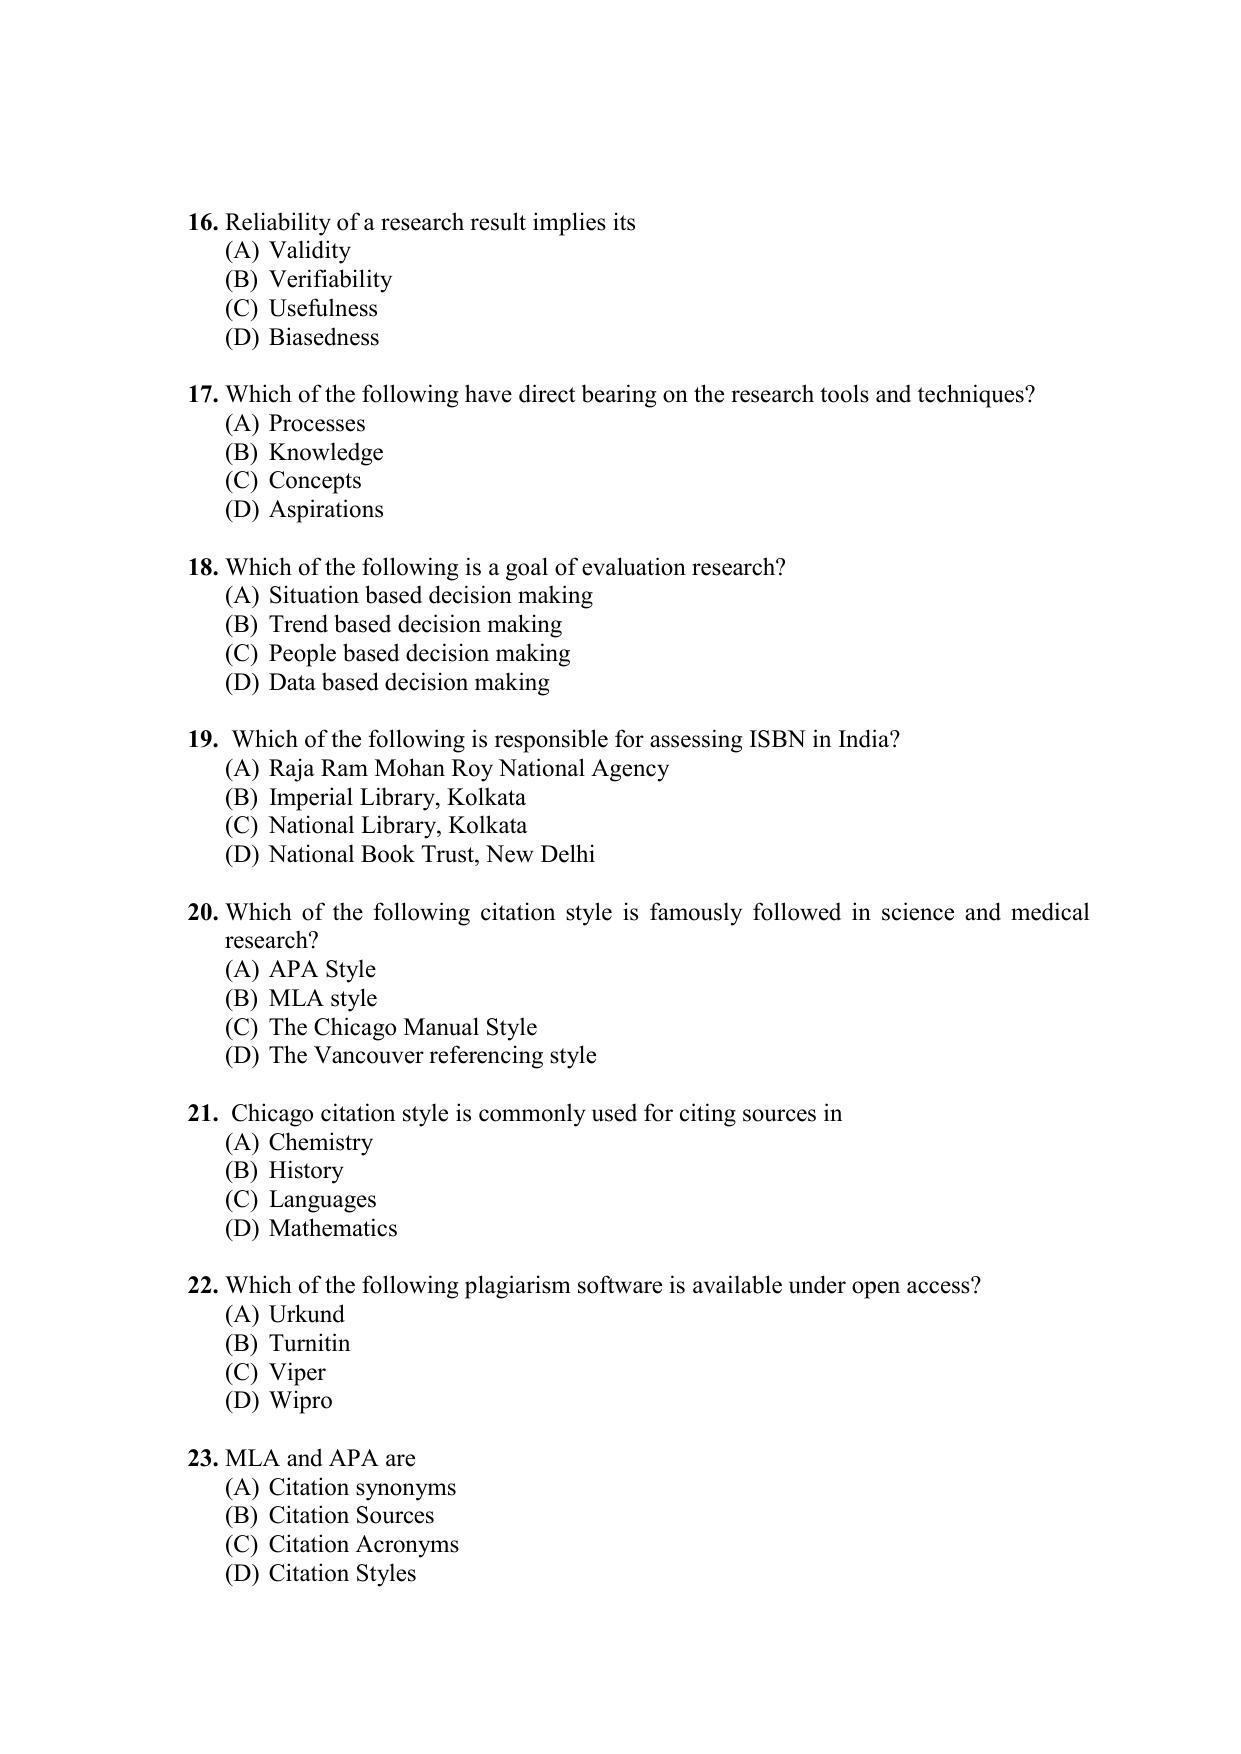 PU MPET Anthropology 2022 Question Papers - Page 26